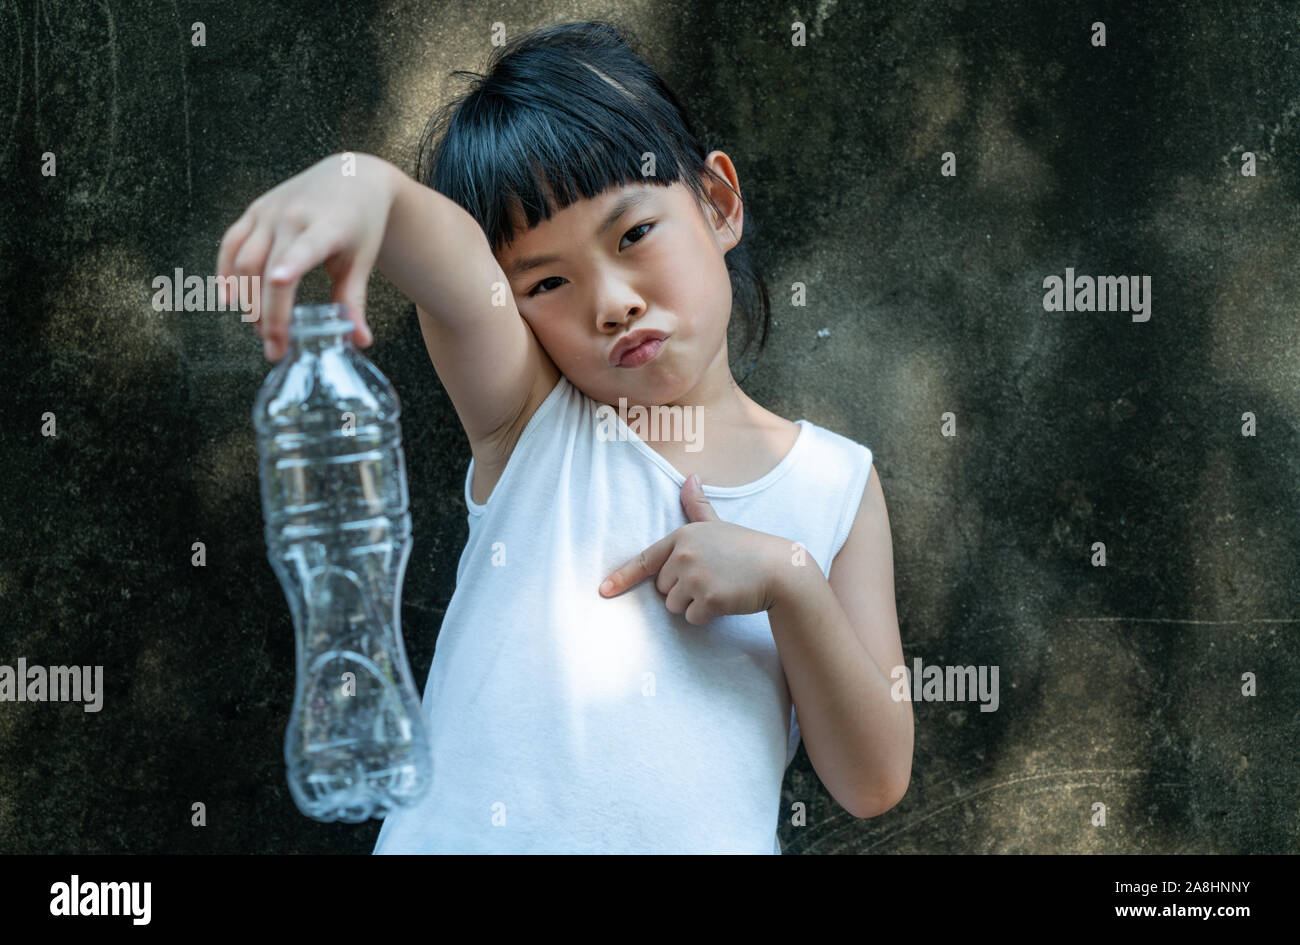 Child Girl Is Holding With Plastic Bottle Concept For Stop Using